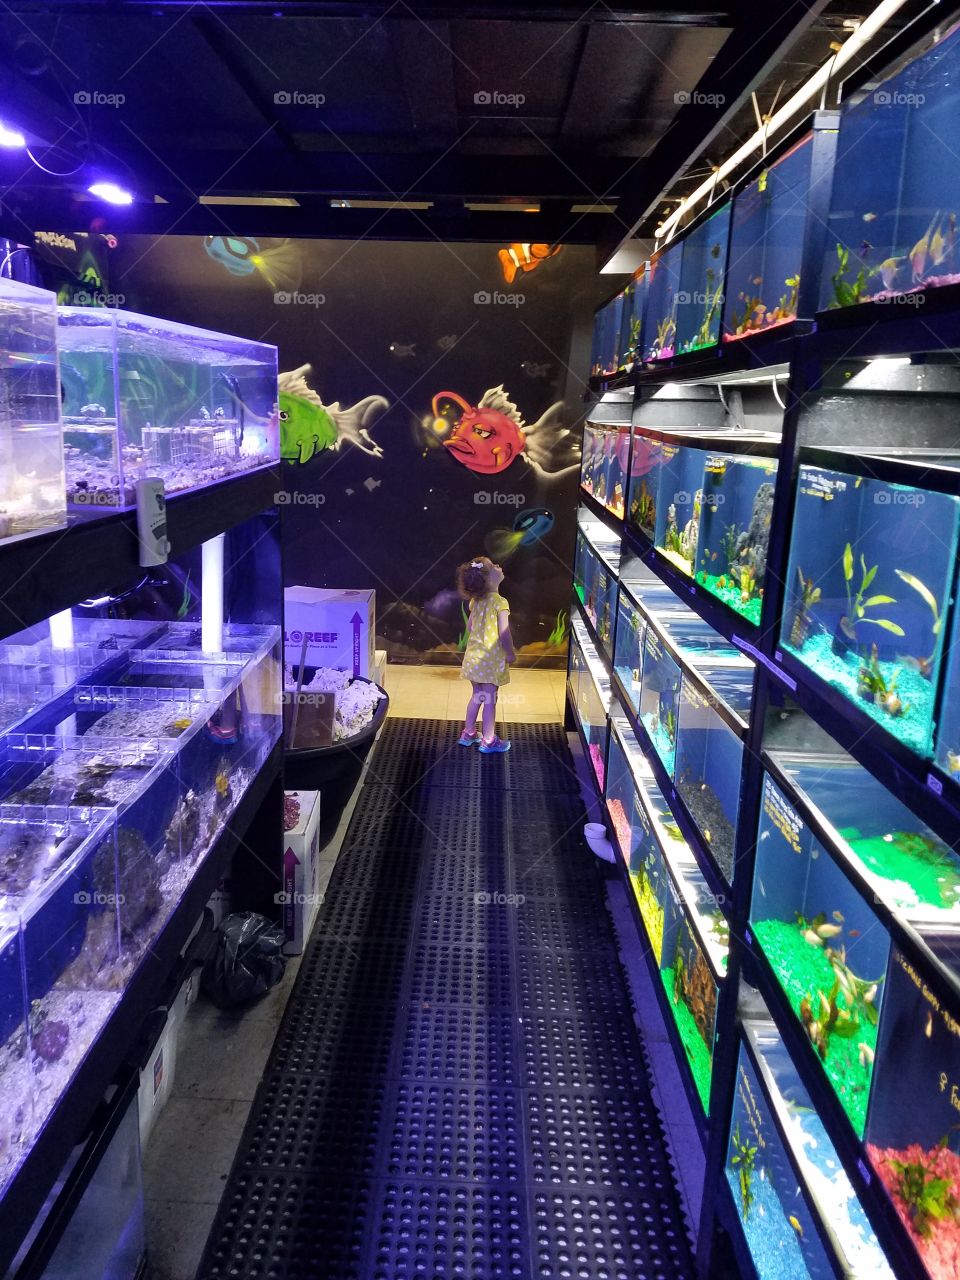 Girl looking at fish in a pet store.